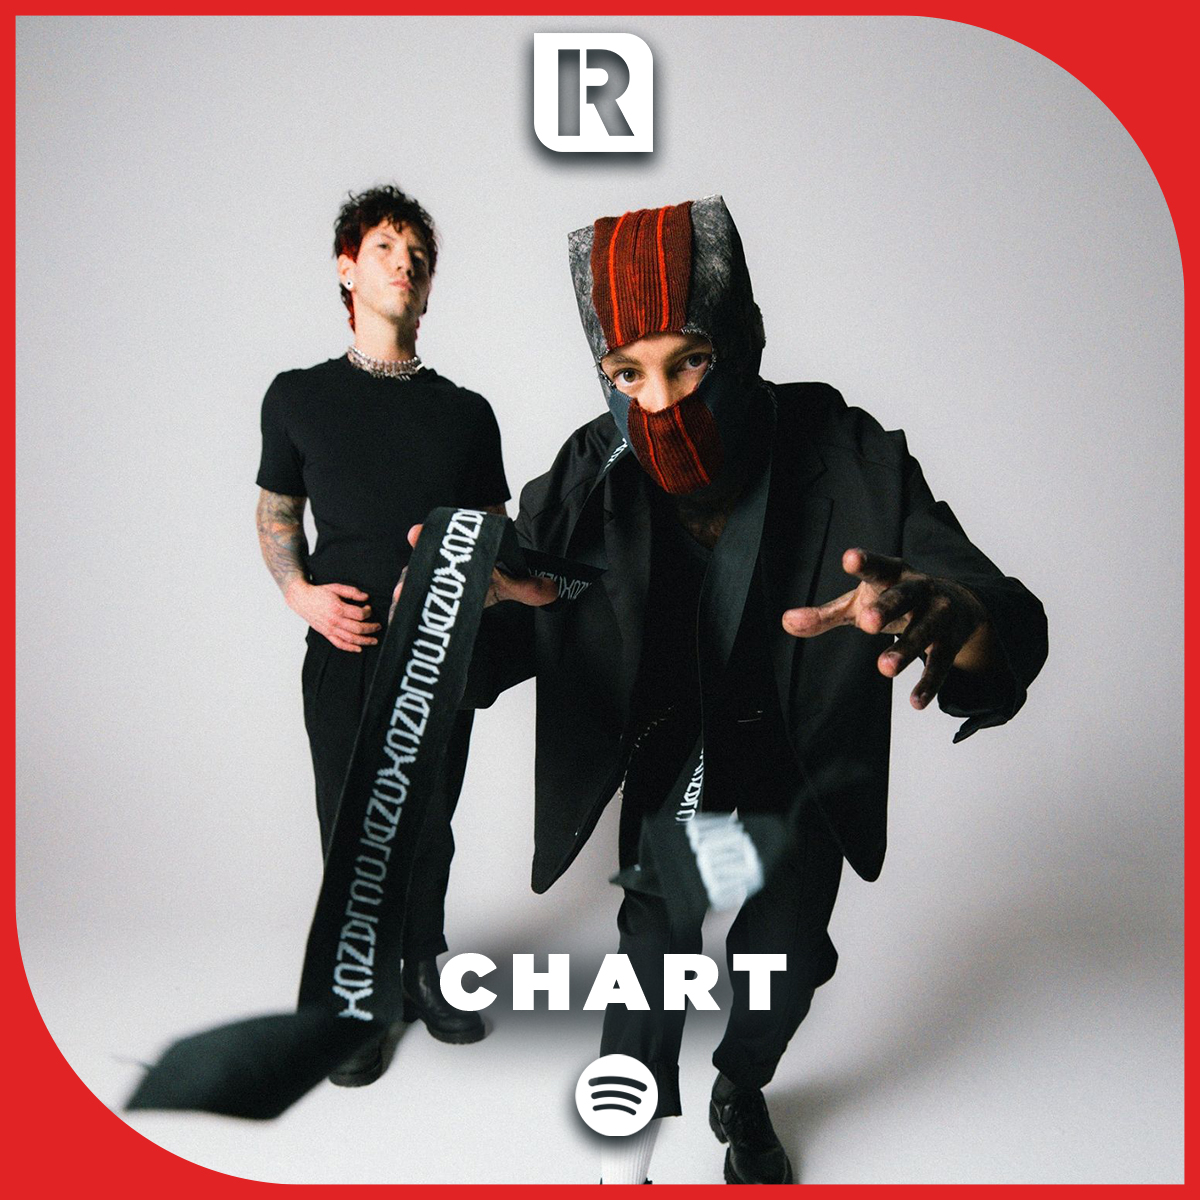 Rock Sound Chart Top 10

1. Twenty One Pilots - 'Overcompensate'
2. Knocked Loose - 'Blinding Faith'
3. Bad Omens & Poppy - 'V.A.N'
4. Linkin Park - 'Friendly Fire'
5. Bring Me The Horizon - 'Kool-Aid'
6. Sum 41 - 'Waiting On A Twist Of Fate'
7. iDKHOW - 'Downside'
8. Phem ft…